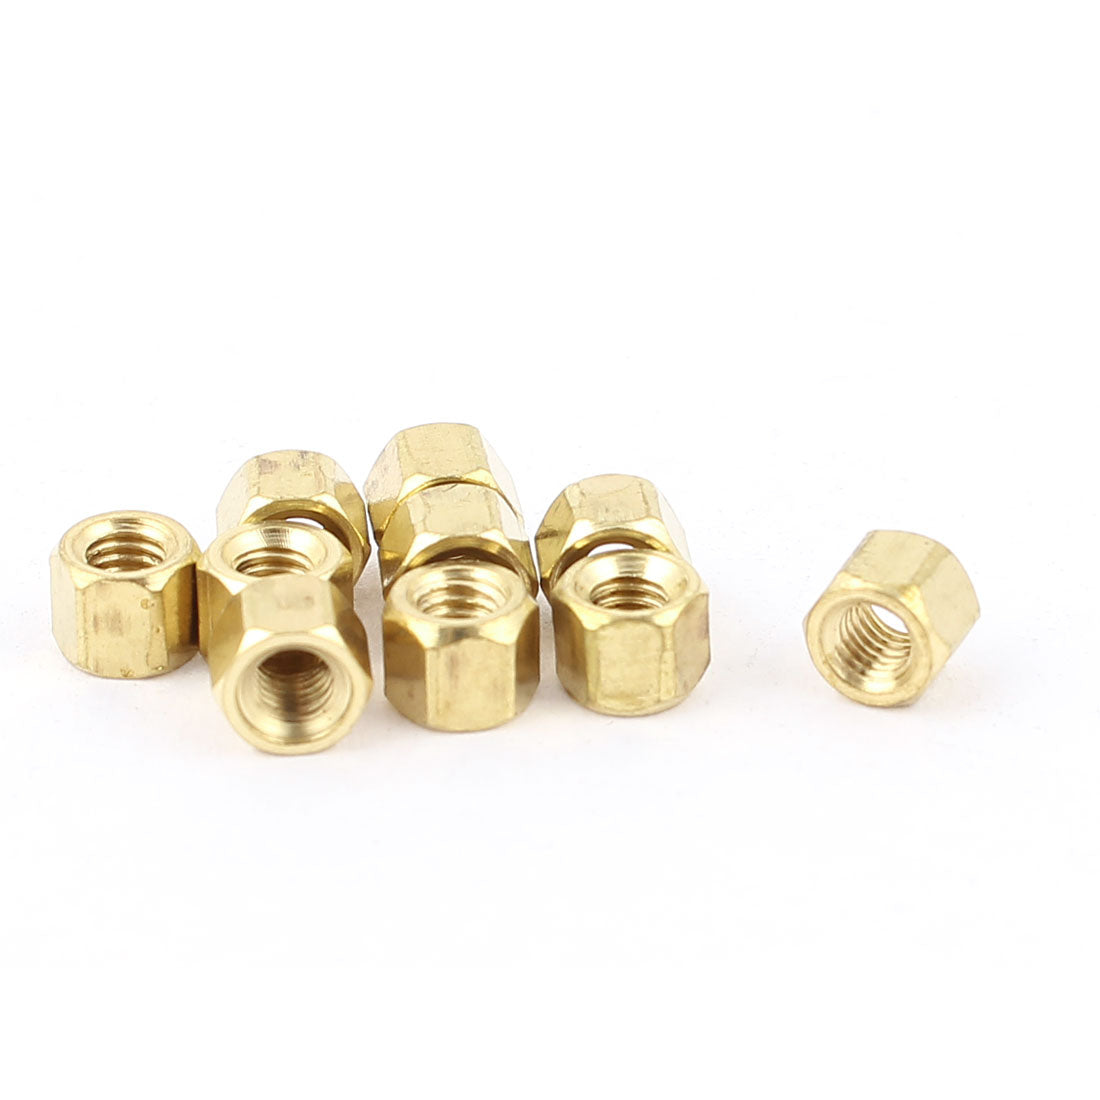 uxcell Uxcell M3 x 4mm Female/Female Thread Brass Hex Standoff PCB Pillar Spacer 10pcs